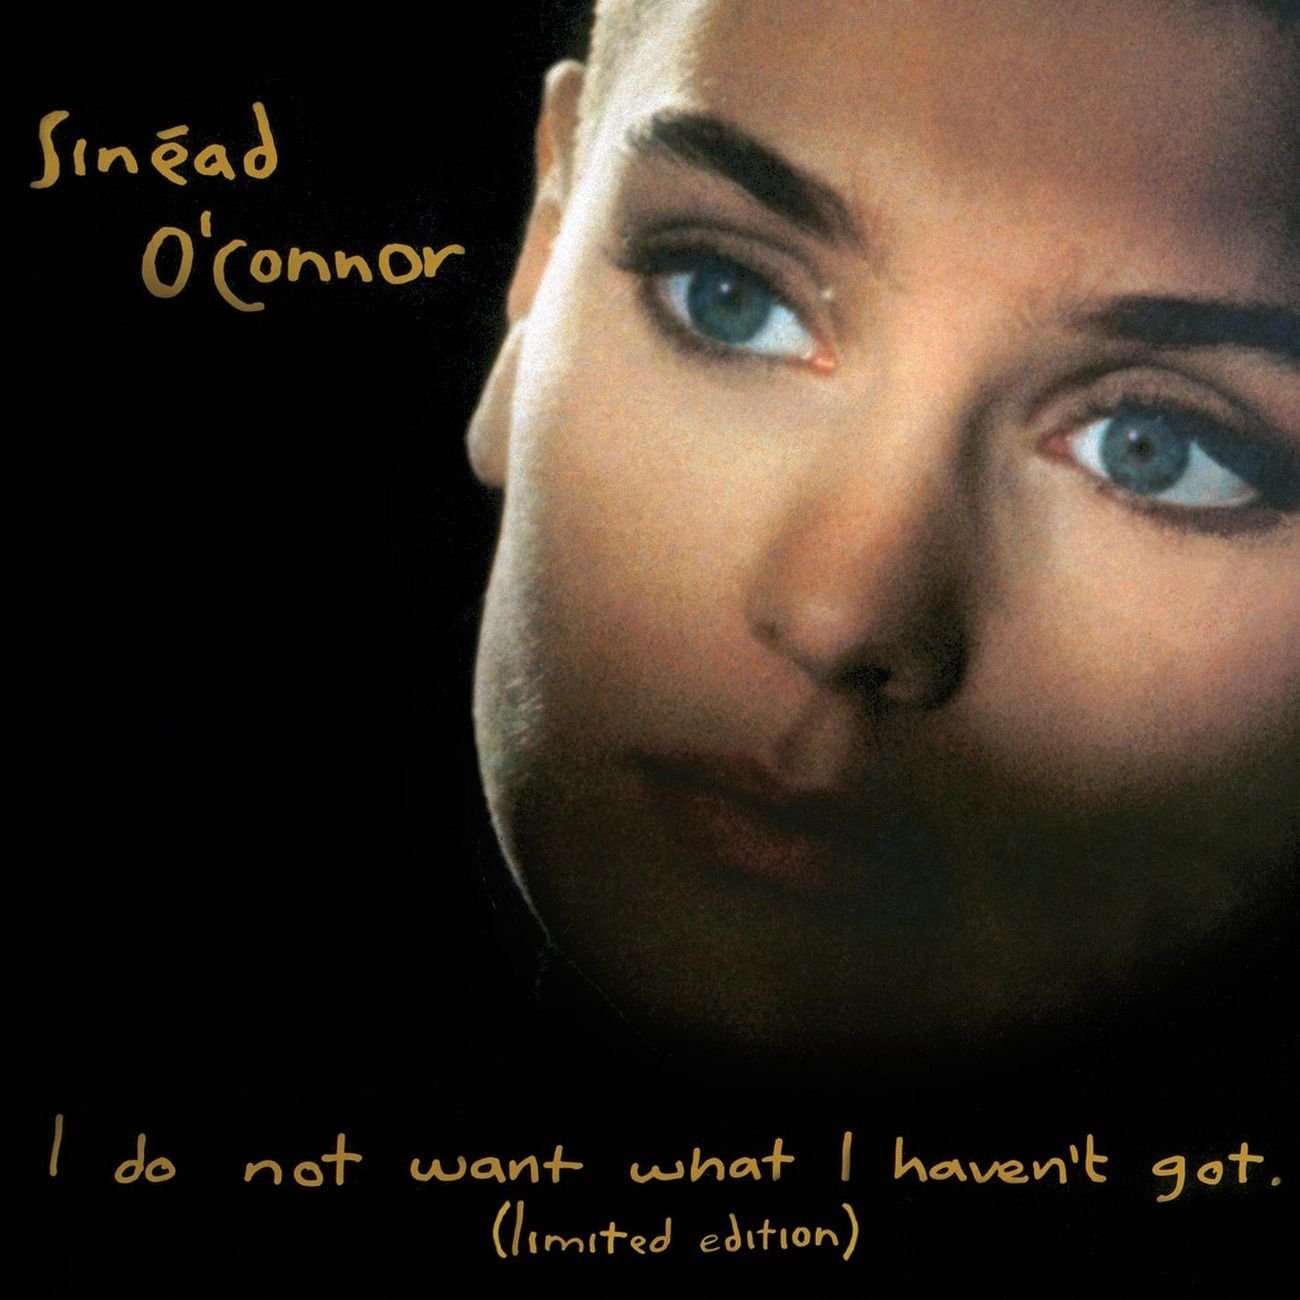 Dear Rock & Roll Hall Of Fame: Induct Sinead O’Connor Already! - SPIN